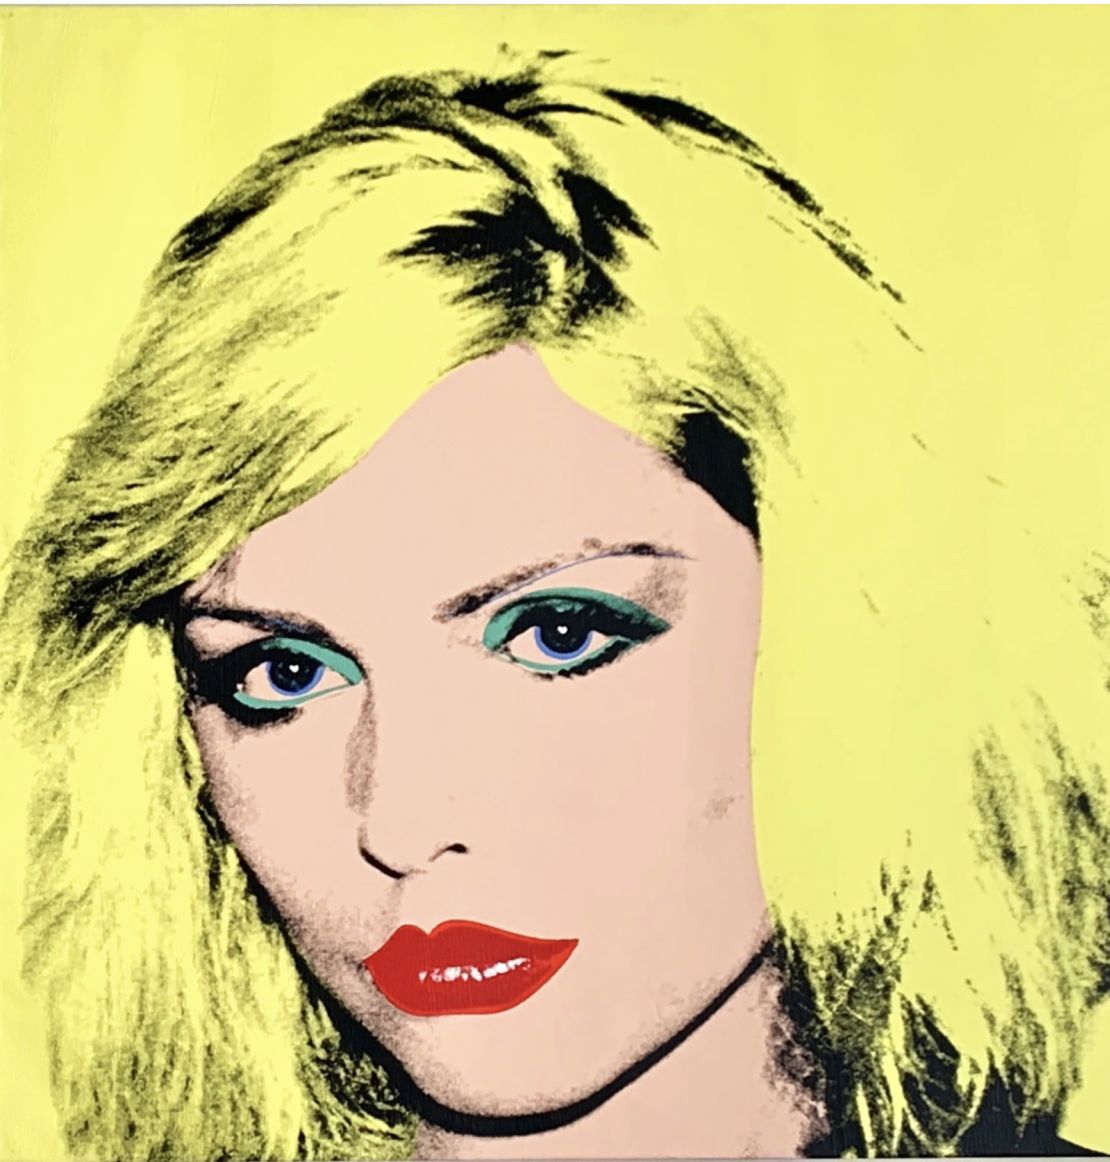 Warhol's 1980 portrait of Debbie Harry has been loaned for the exhibition. 